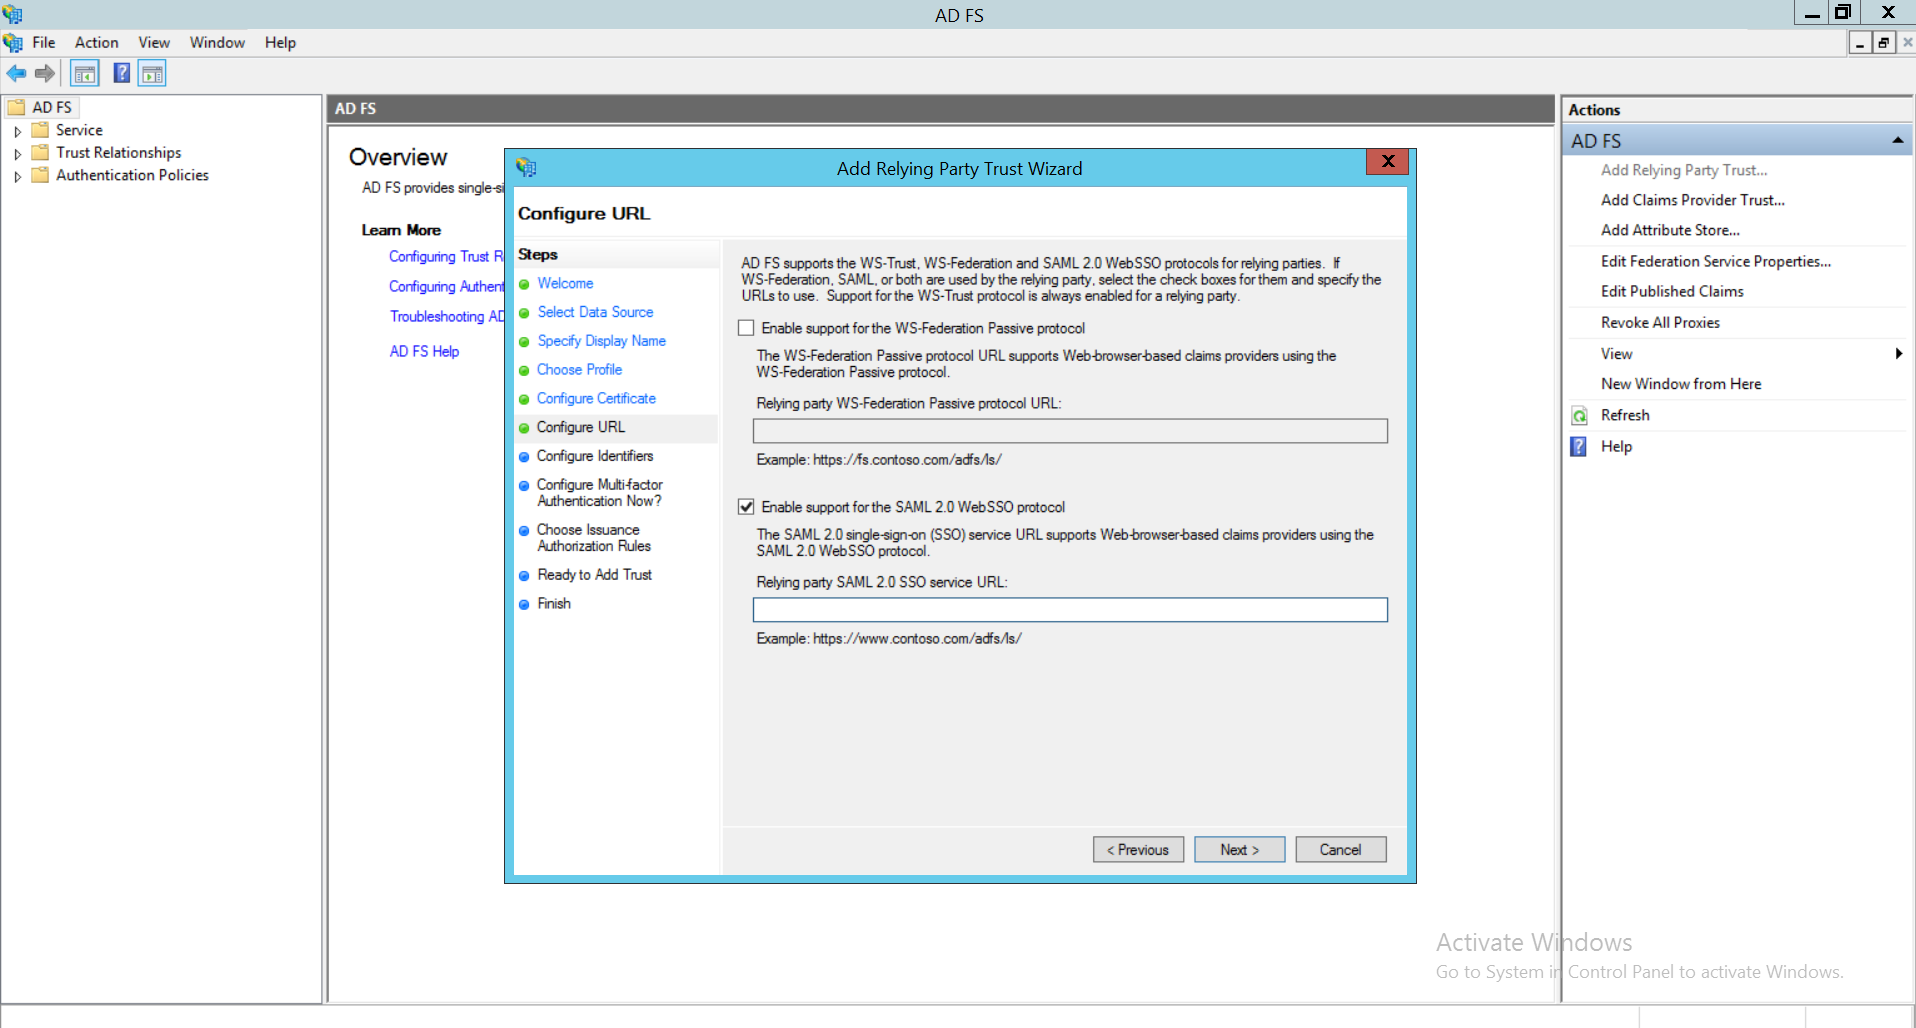 Configure ADFS IdP in OpManager